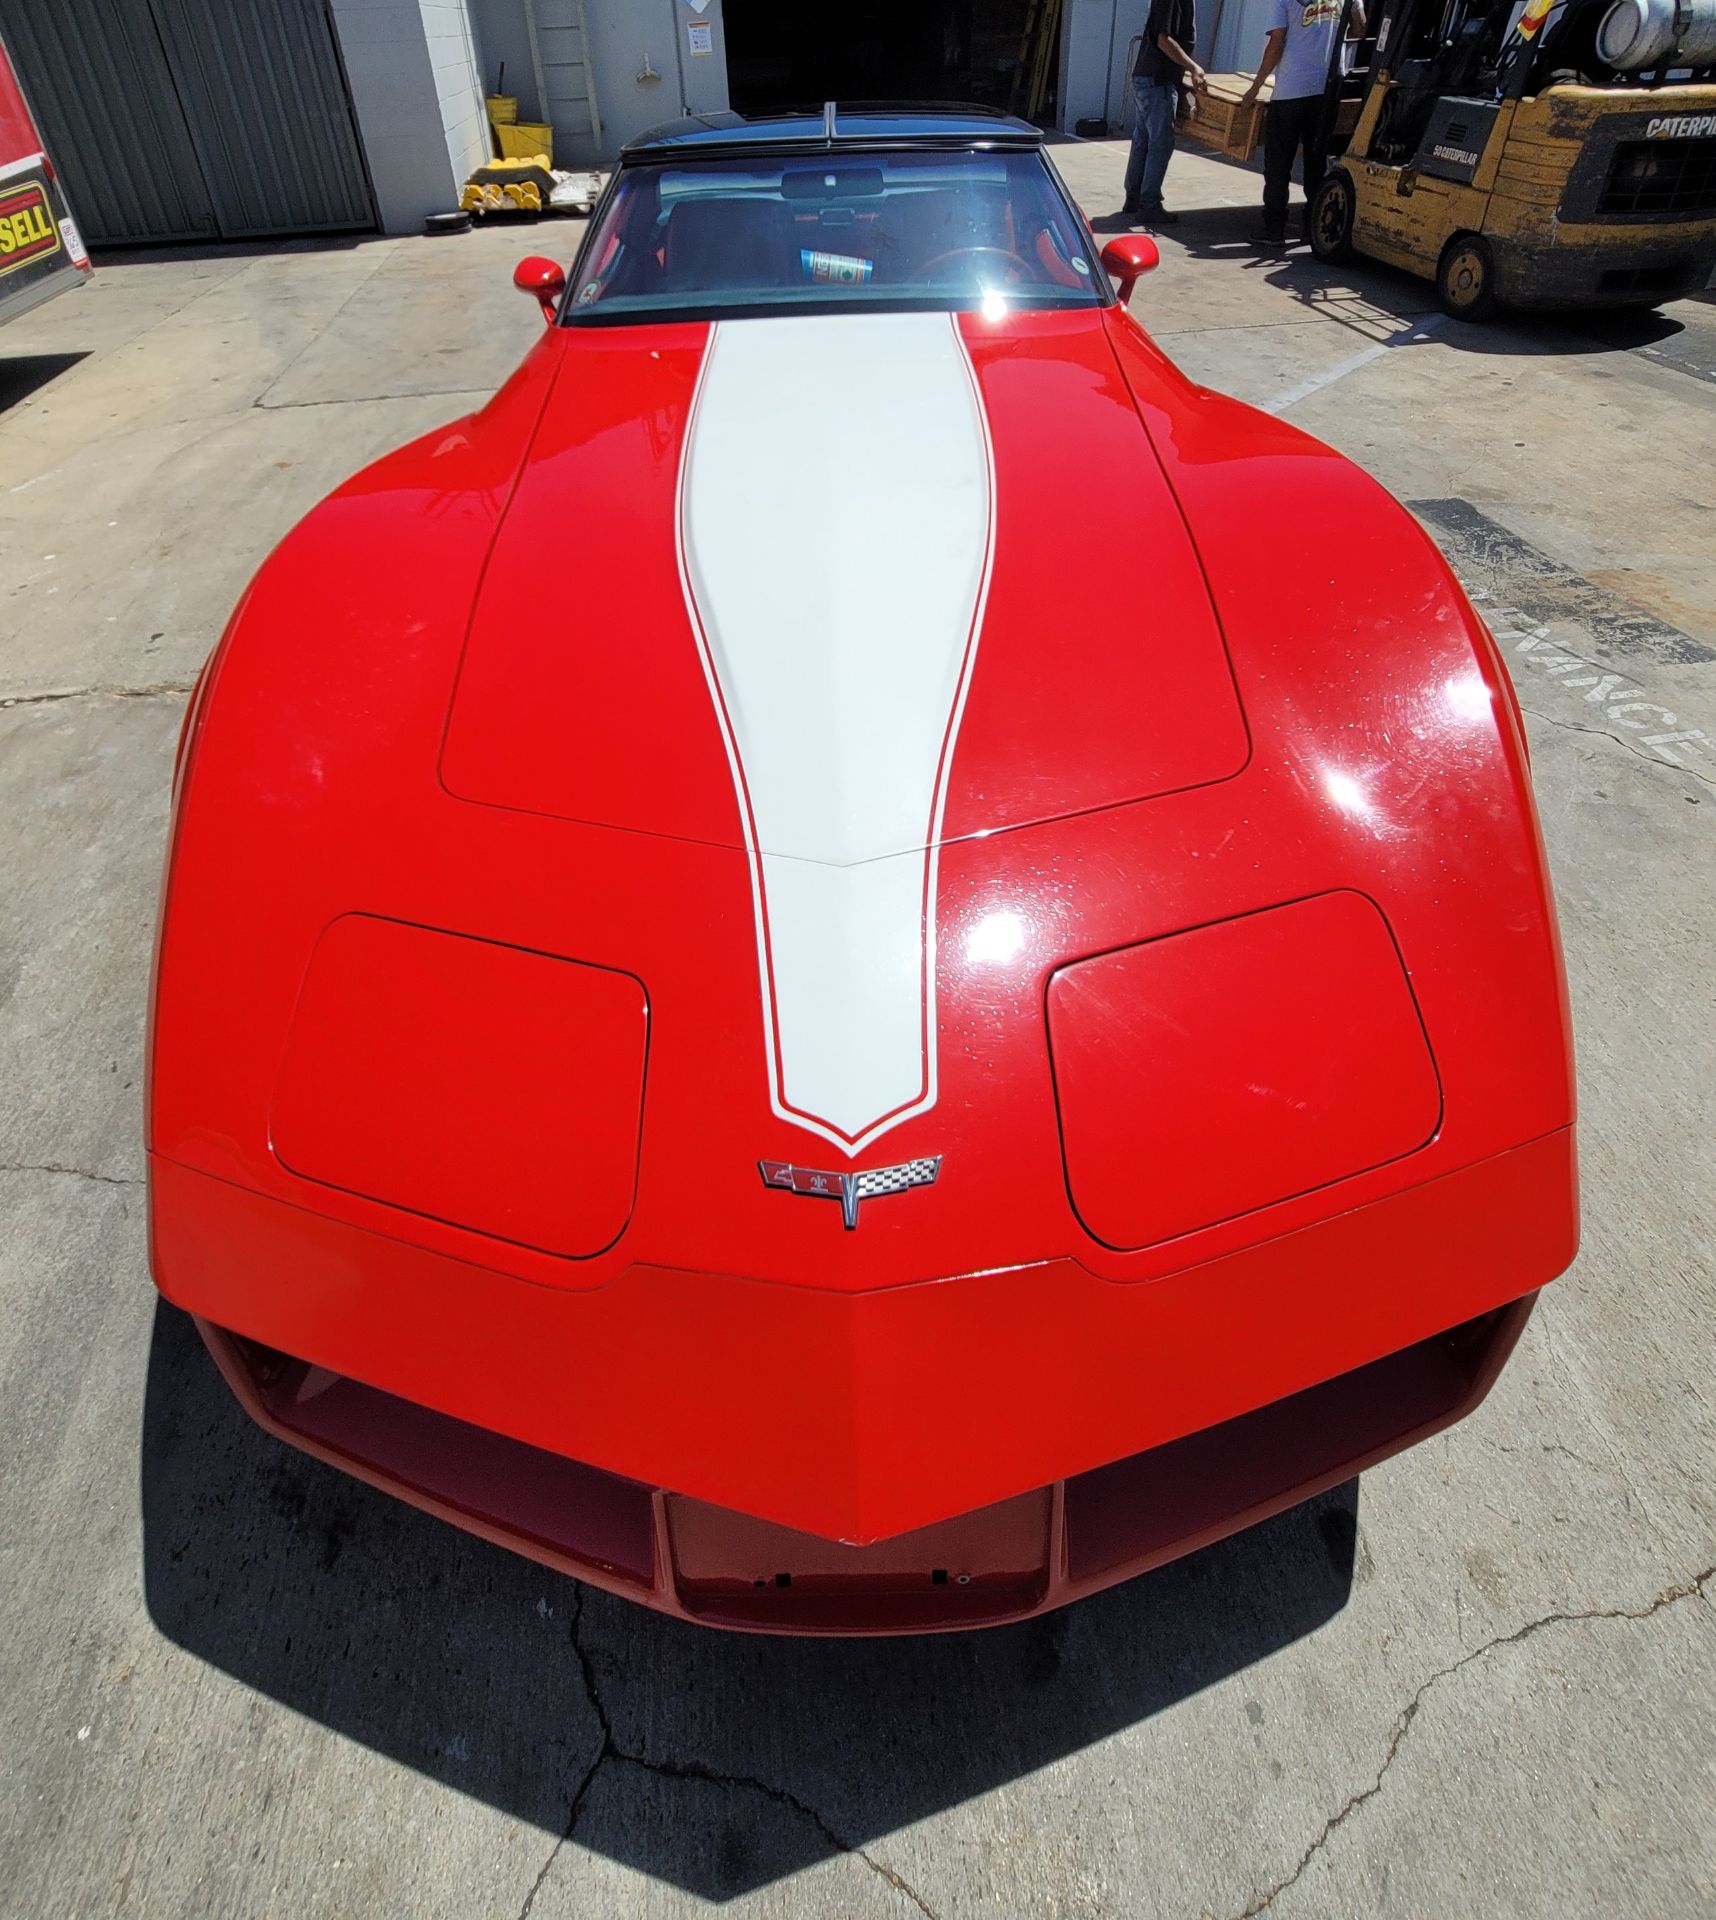 1980 CHEVROLET CORVETTE, WAS VIC EDELBROCK'S PERSONAL CAR BOUGHT FOR R&D, RED INTERIOR, TITLE ONLY. - Image 16 of 70